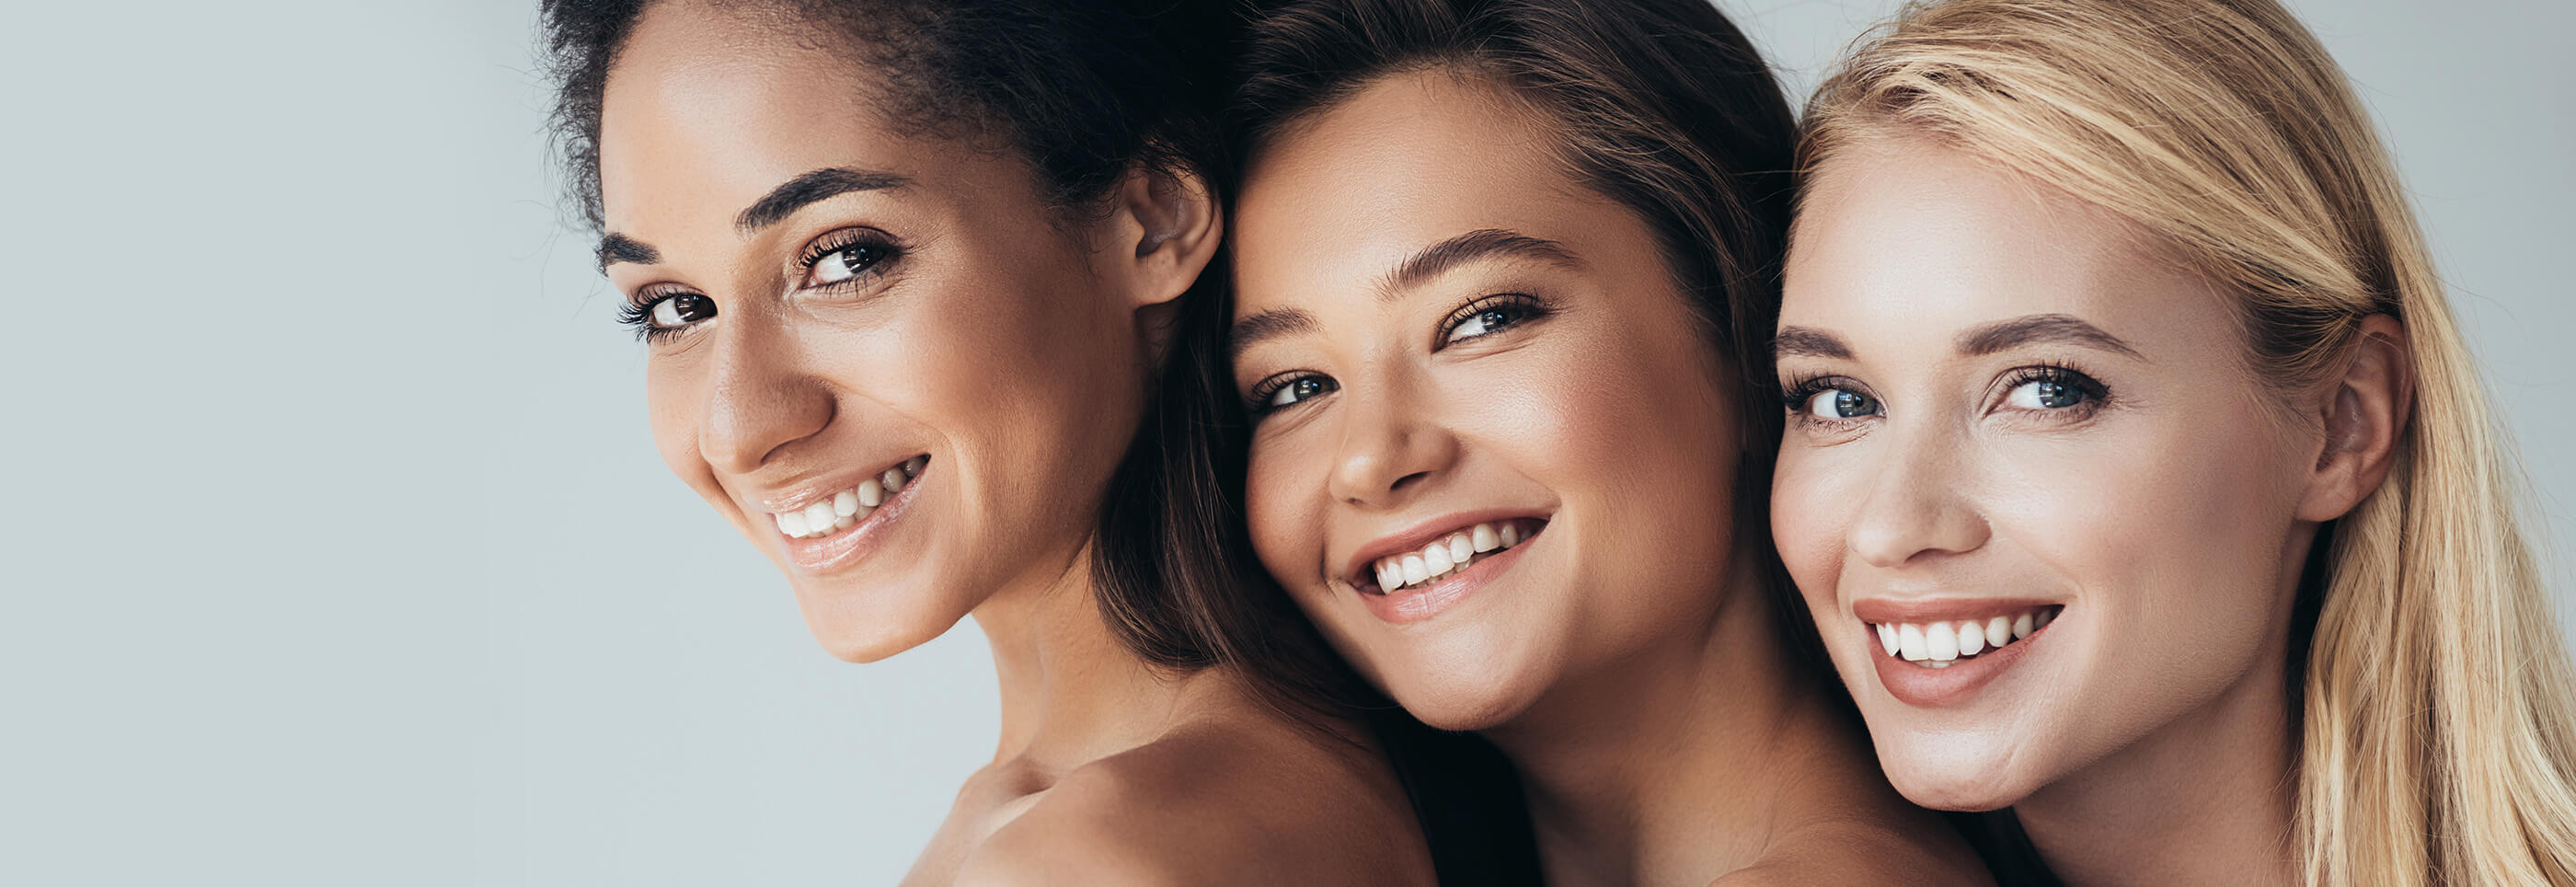 Three smiling women with diverse skin tones, showcasing their radiant healthy skin, exemplify the expert skincare provided by Springs Dermatology MD.